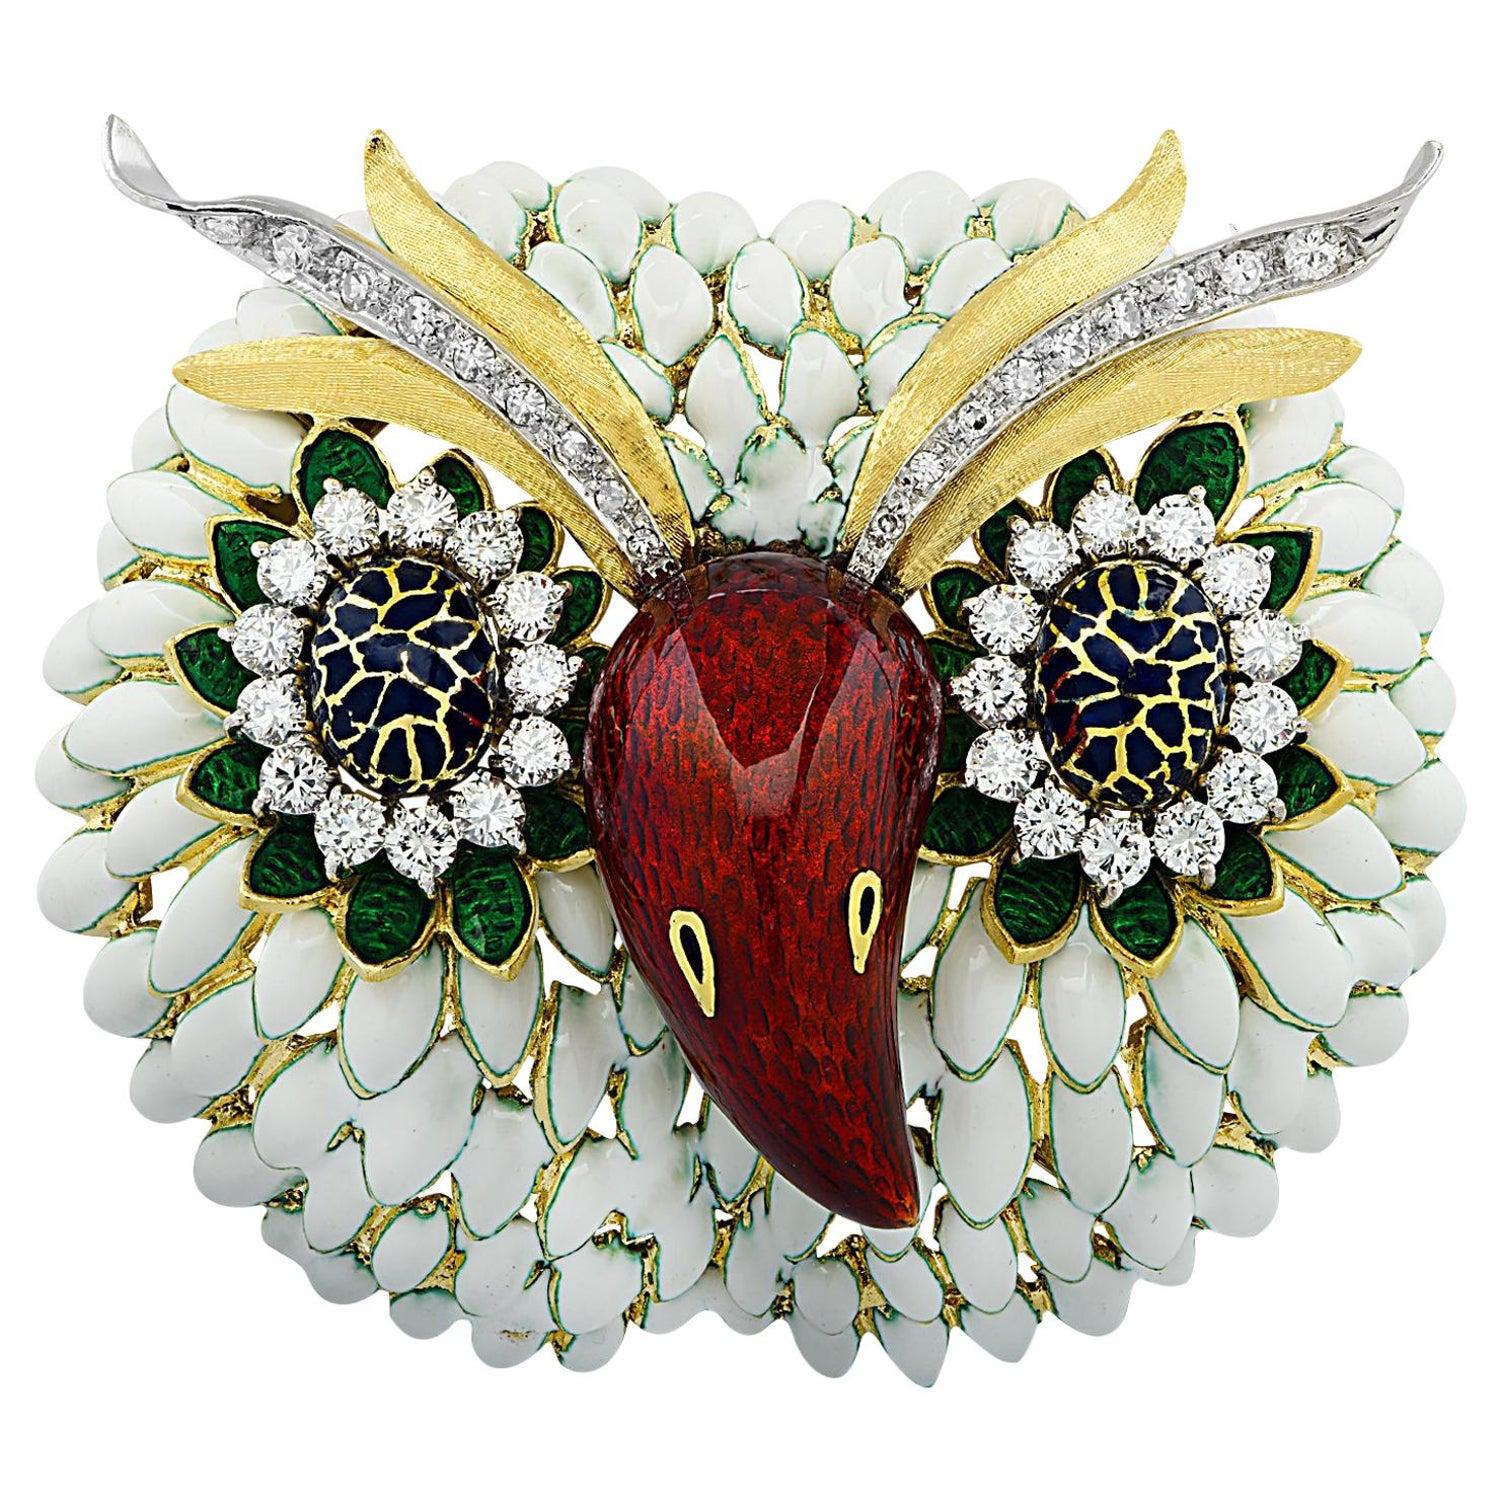 A large enamel owl clip brooch by Corletto embellished with 2 carats of diamonds. Made in Italy, circa 1970. 